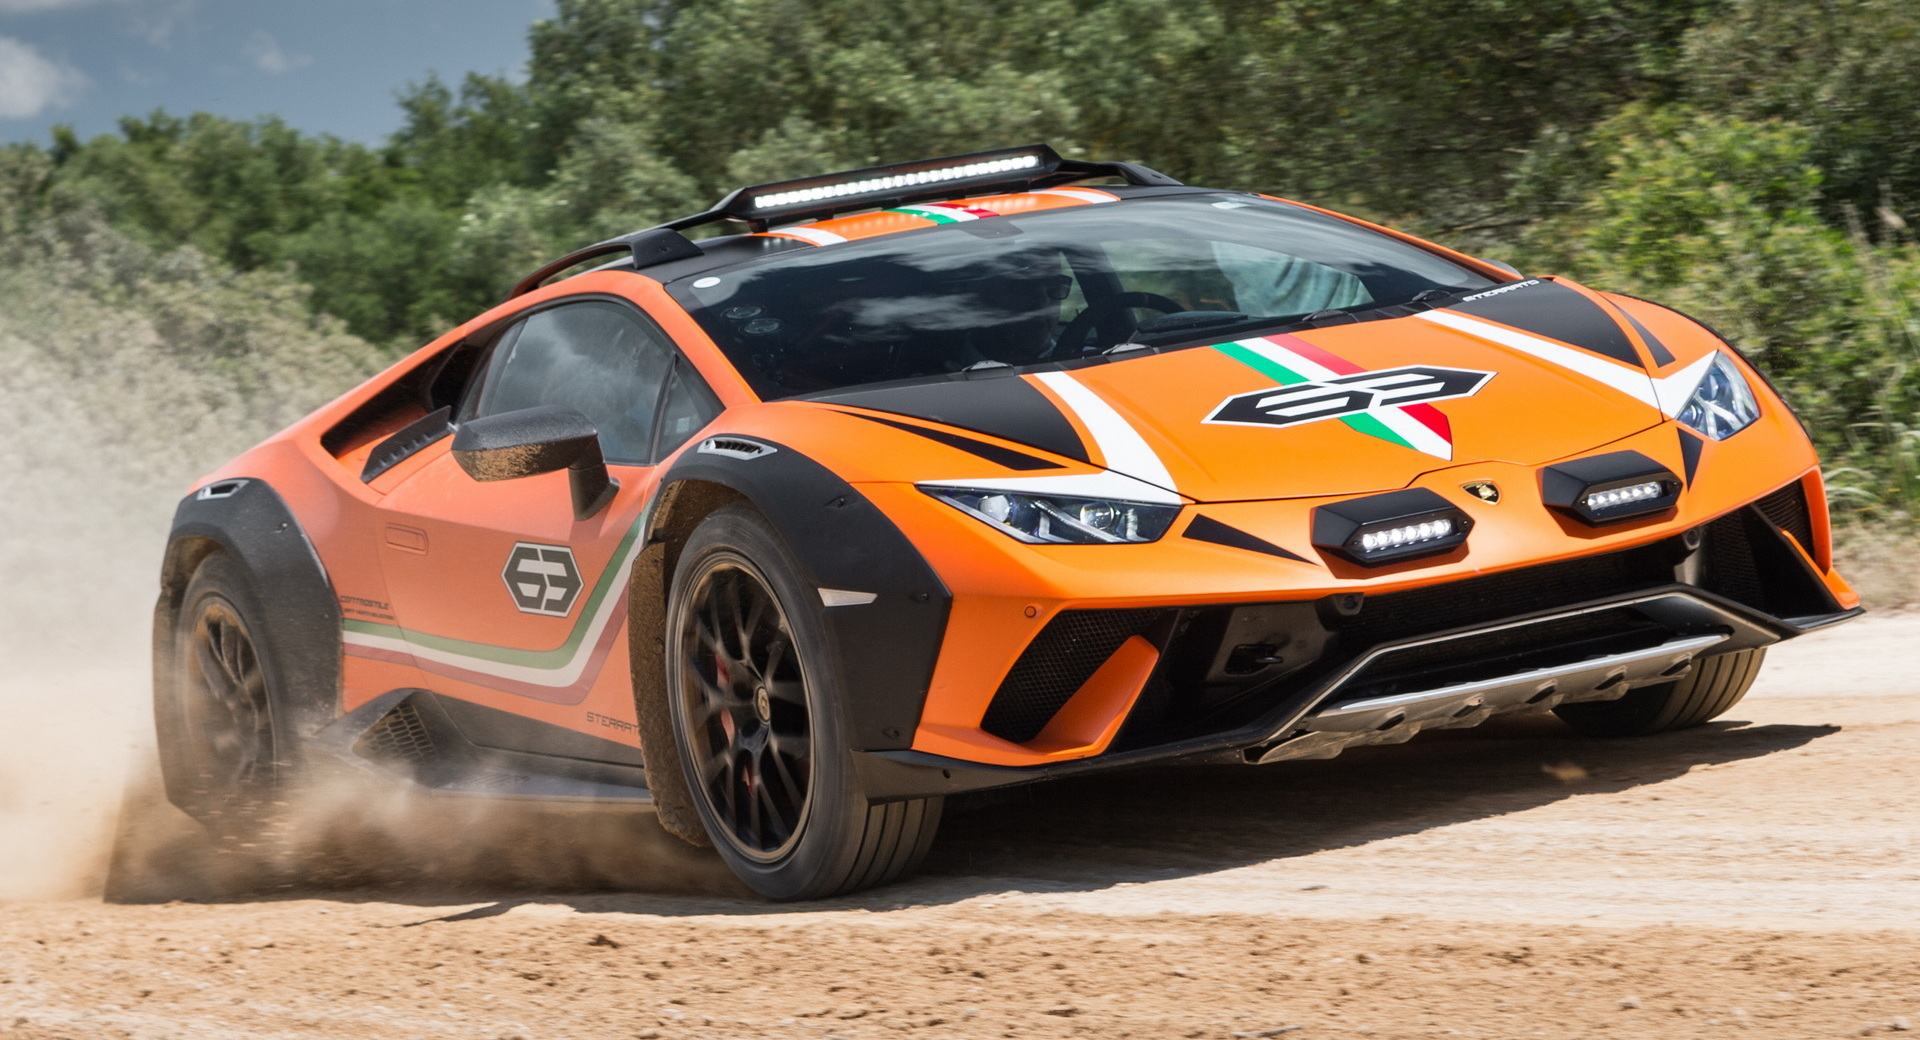 Lamborghini Huracan Sterrato Development Started With A Raised Prototype  And A Dirt Track | Carscoops